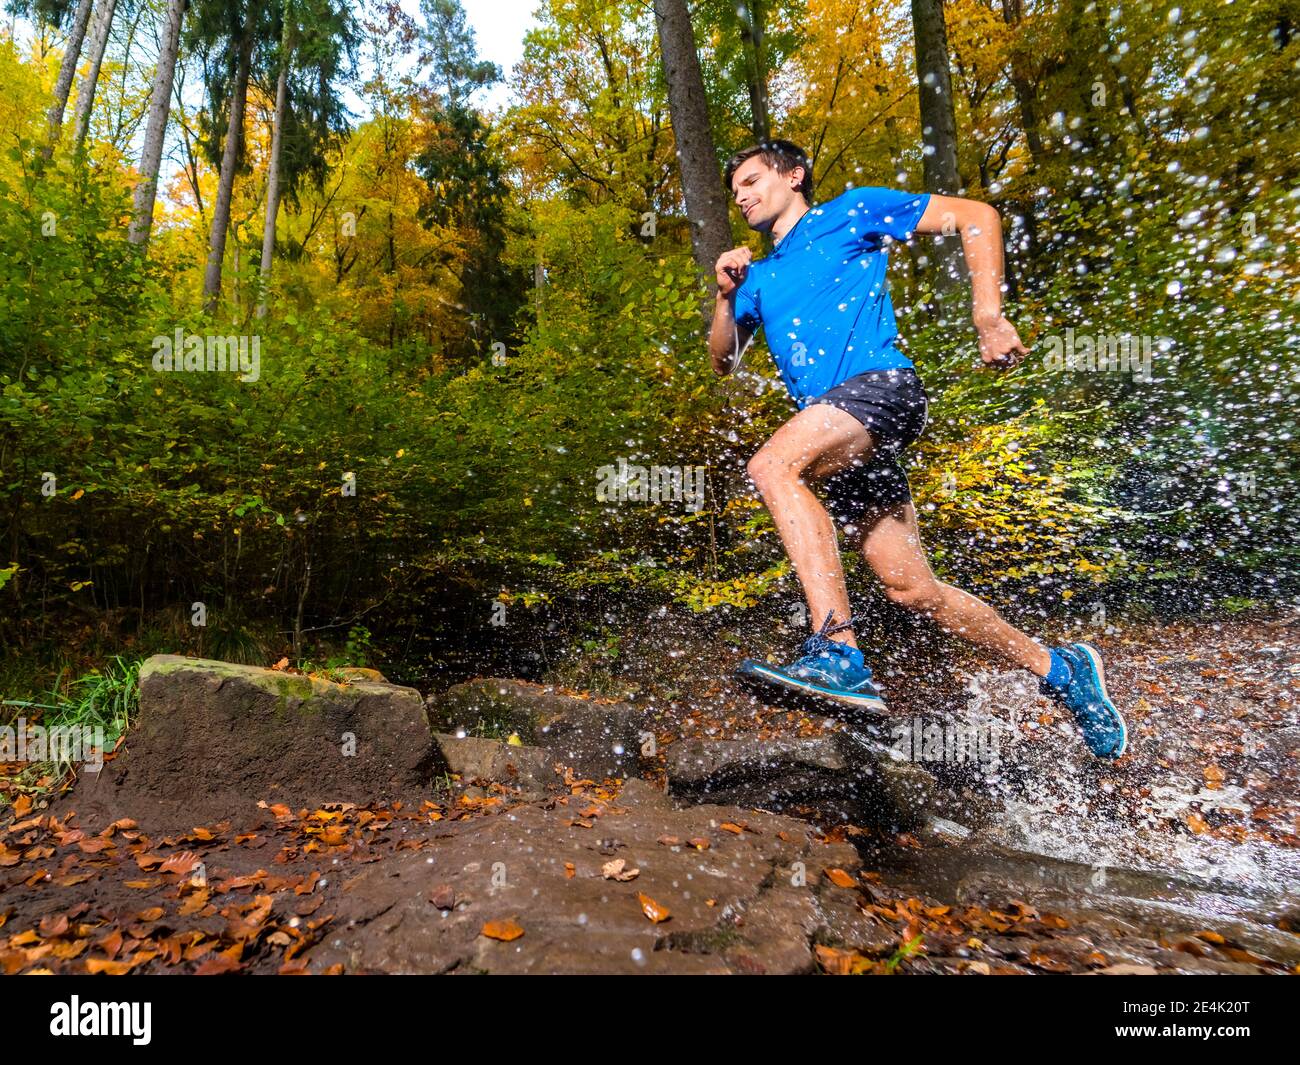 Young male sportsperson splashing water while trail running in autumn forest at Kappelberg, Germany Stock Photo